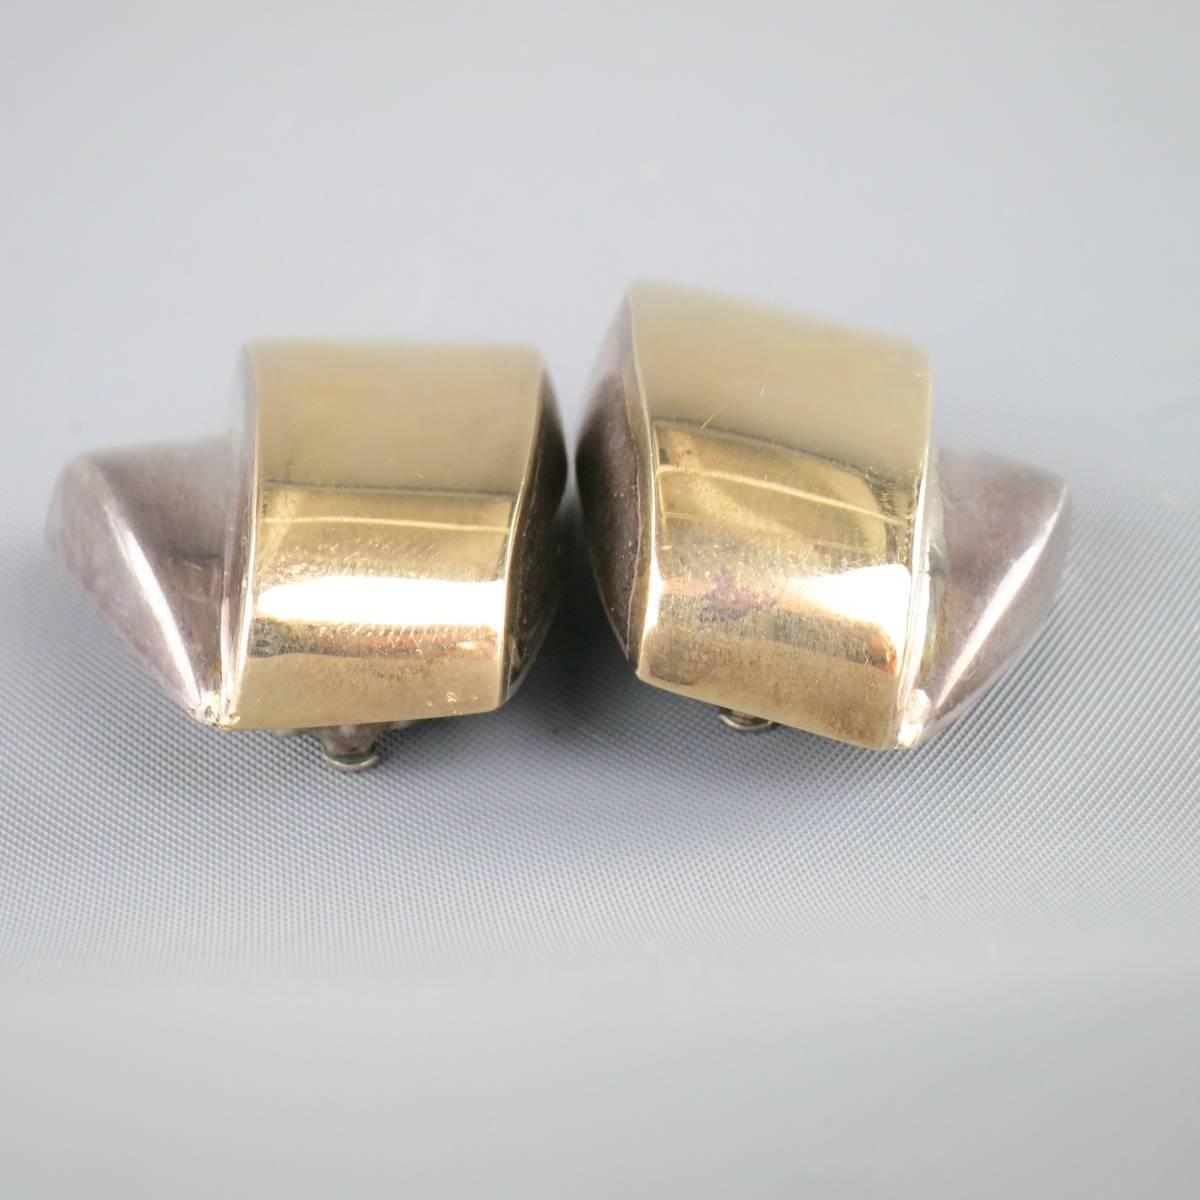 Vintage 1980's BIMA clip on earrings come in gold and silver toned sterling silver and feature an oversized art deco geometric motif. Tarnishing throughout. As-Is.
 
Fair Pre-Owned Condition.
Marked: 925
 
Length: 4 cm.
Width: 3 cm.


Web ID: 82036 